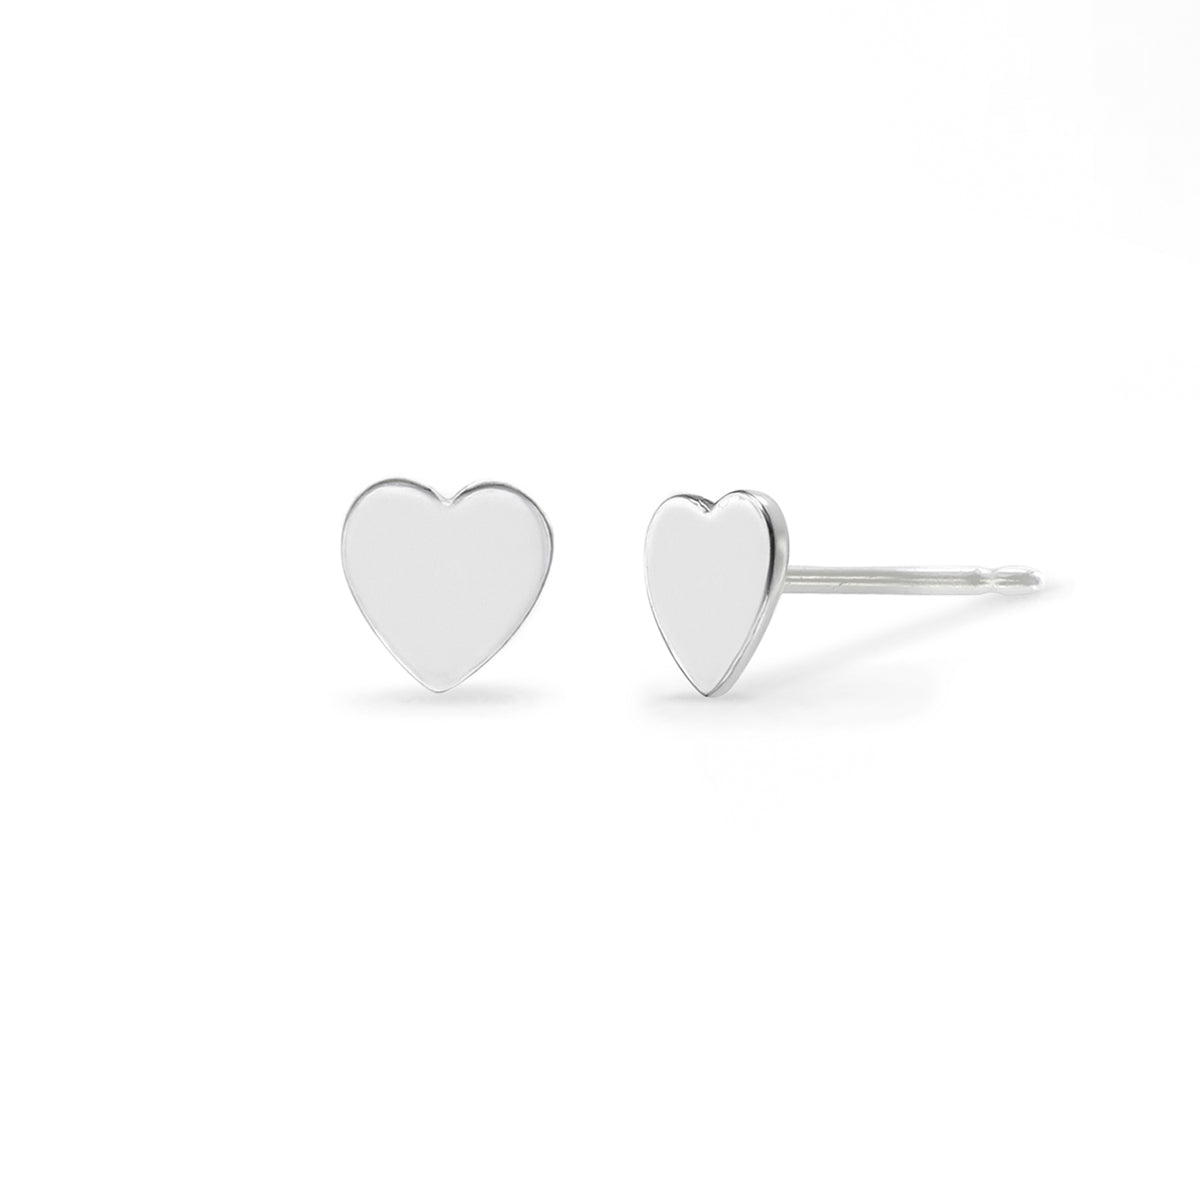 Boma Sterling Silver Post Earrings - Heart Smooth Finish    